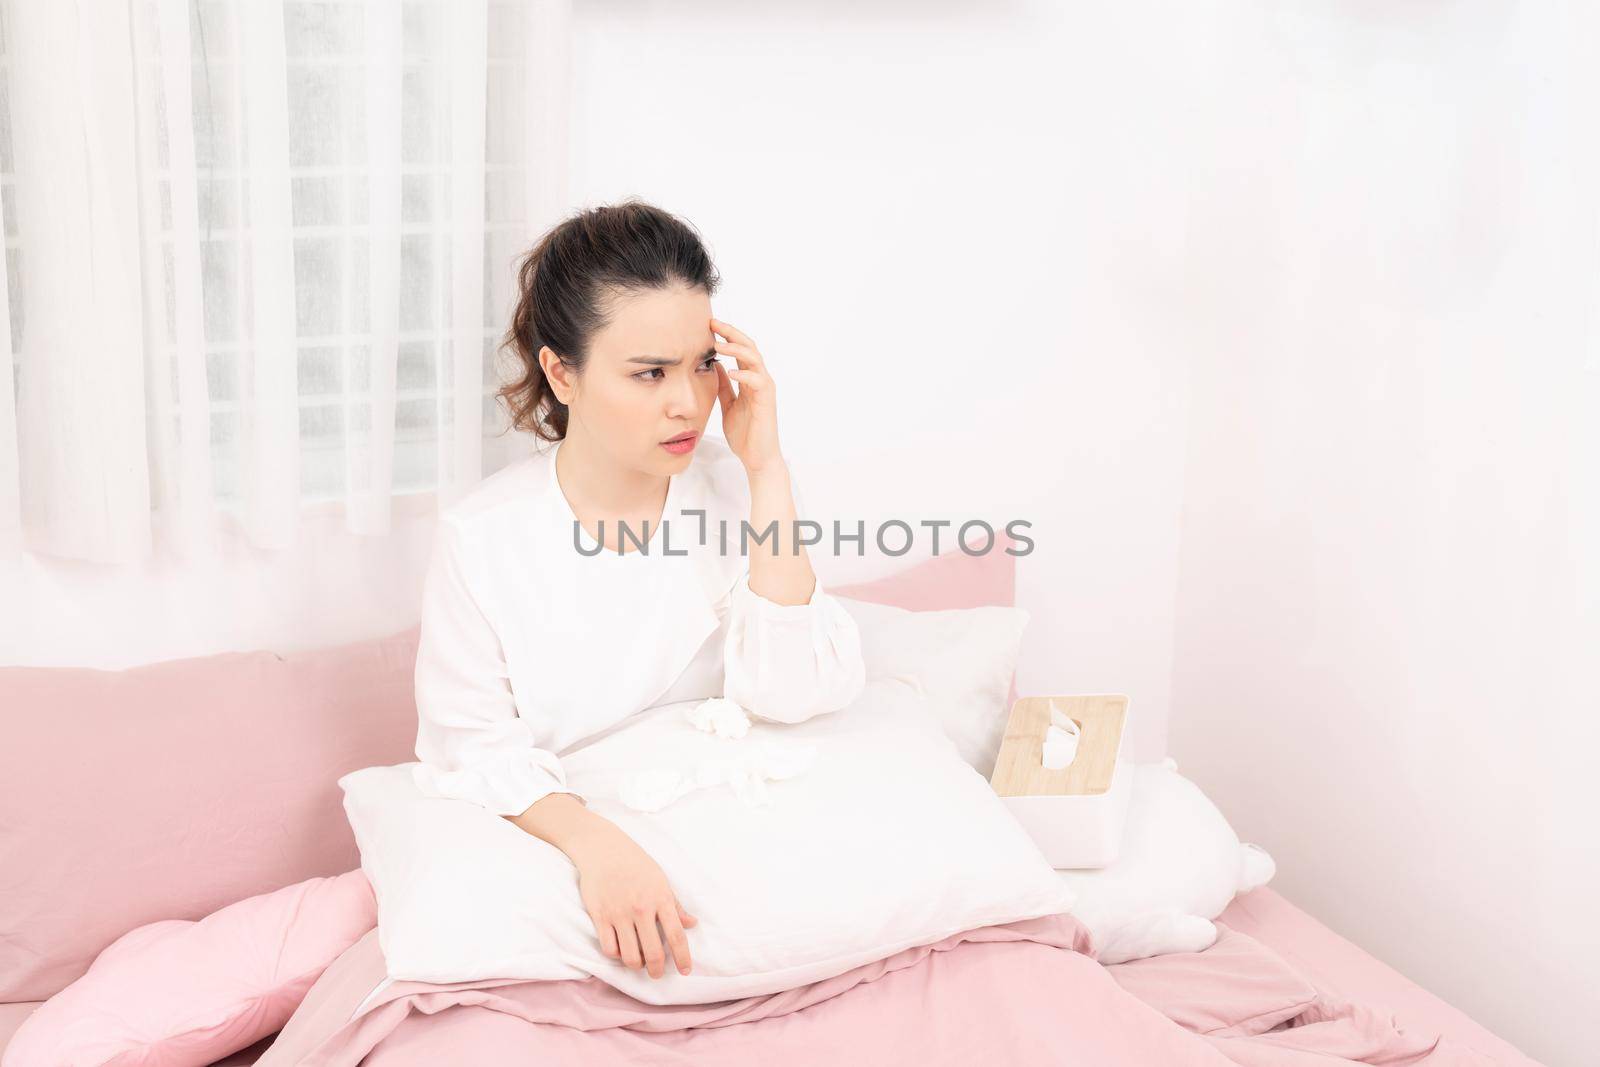 Flu. Closeup image of frustrated sick woman with red nose lying in bed in thick scarf